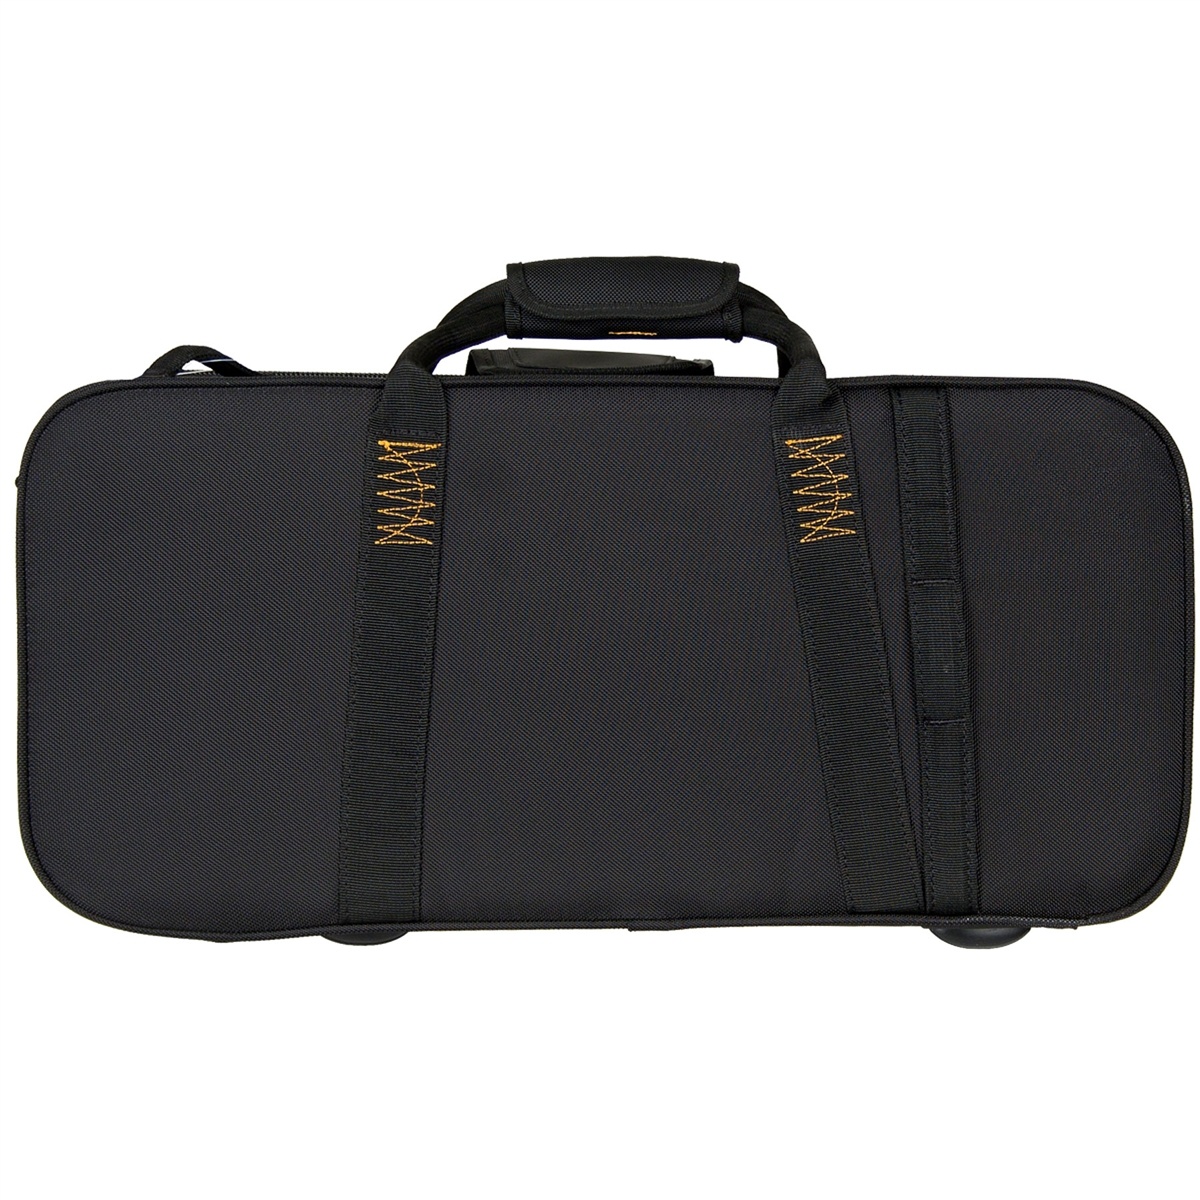 Protec Protec PB301 Pro Pac Trumpet Case with Mute Section